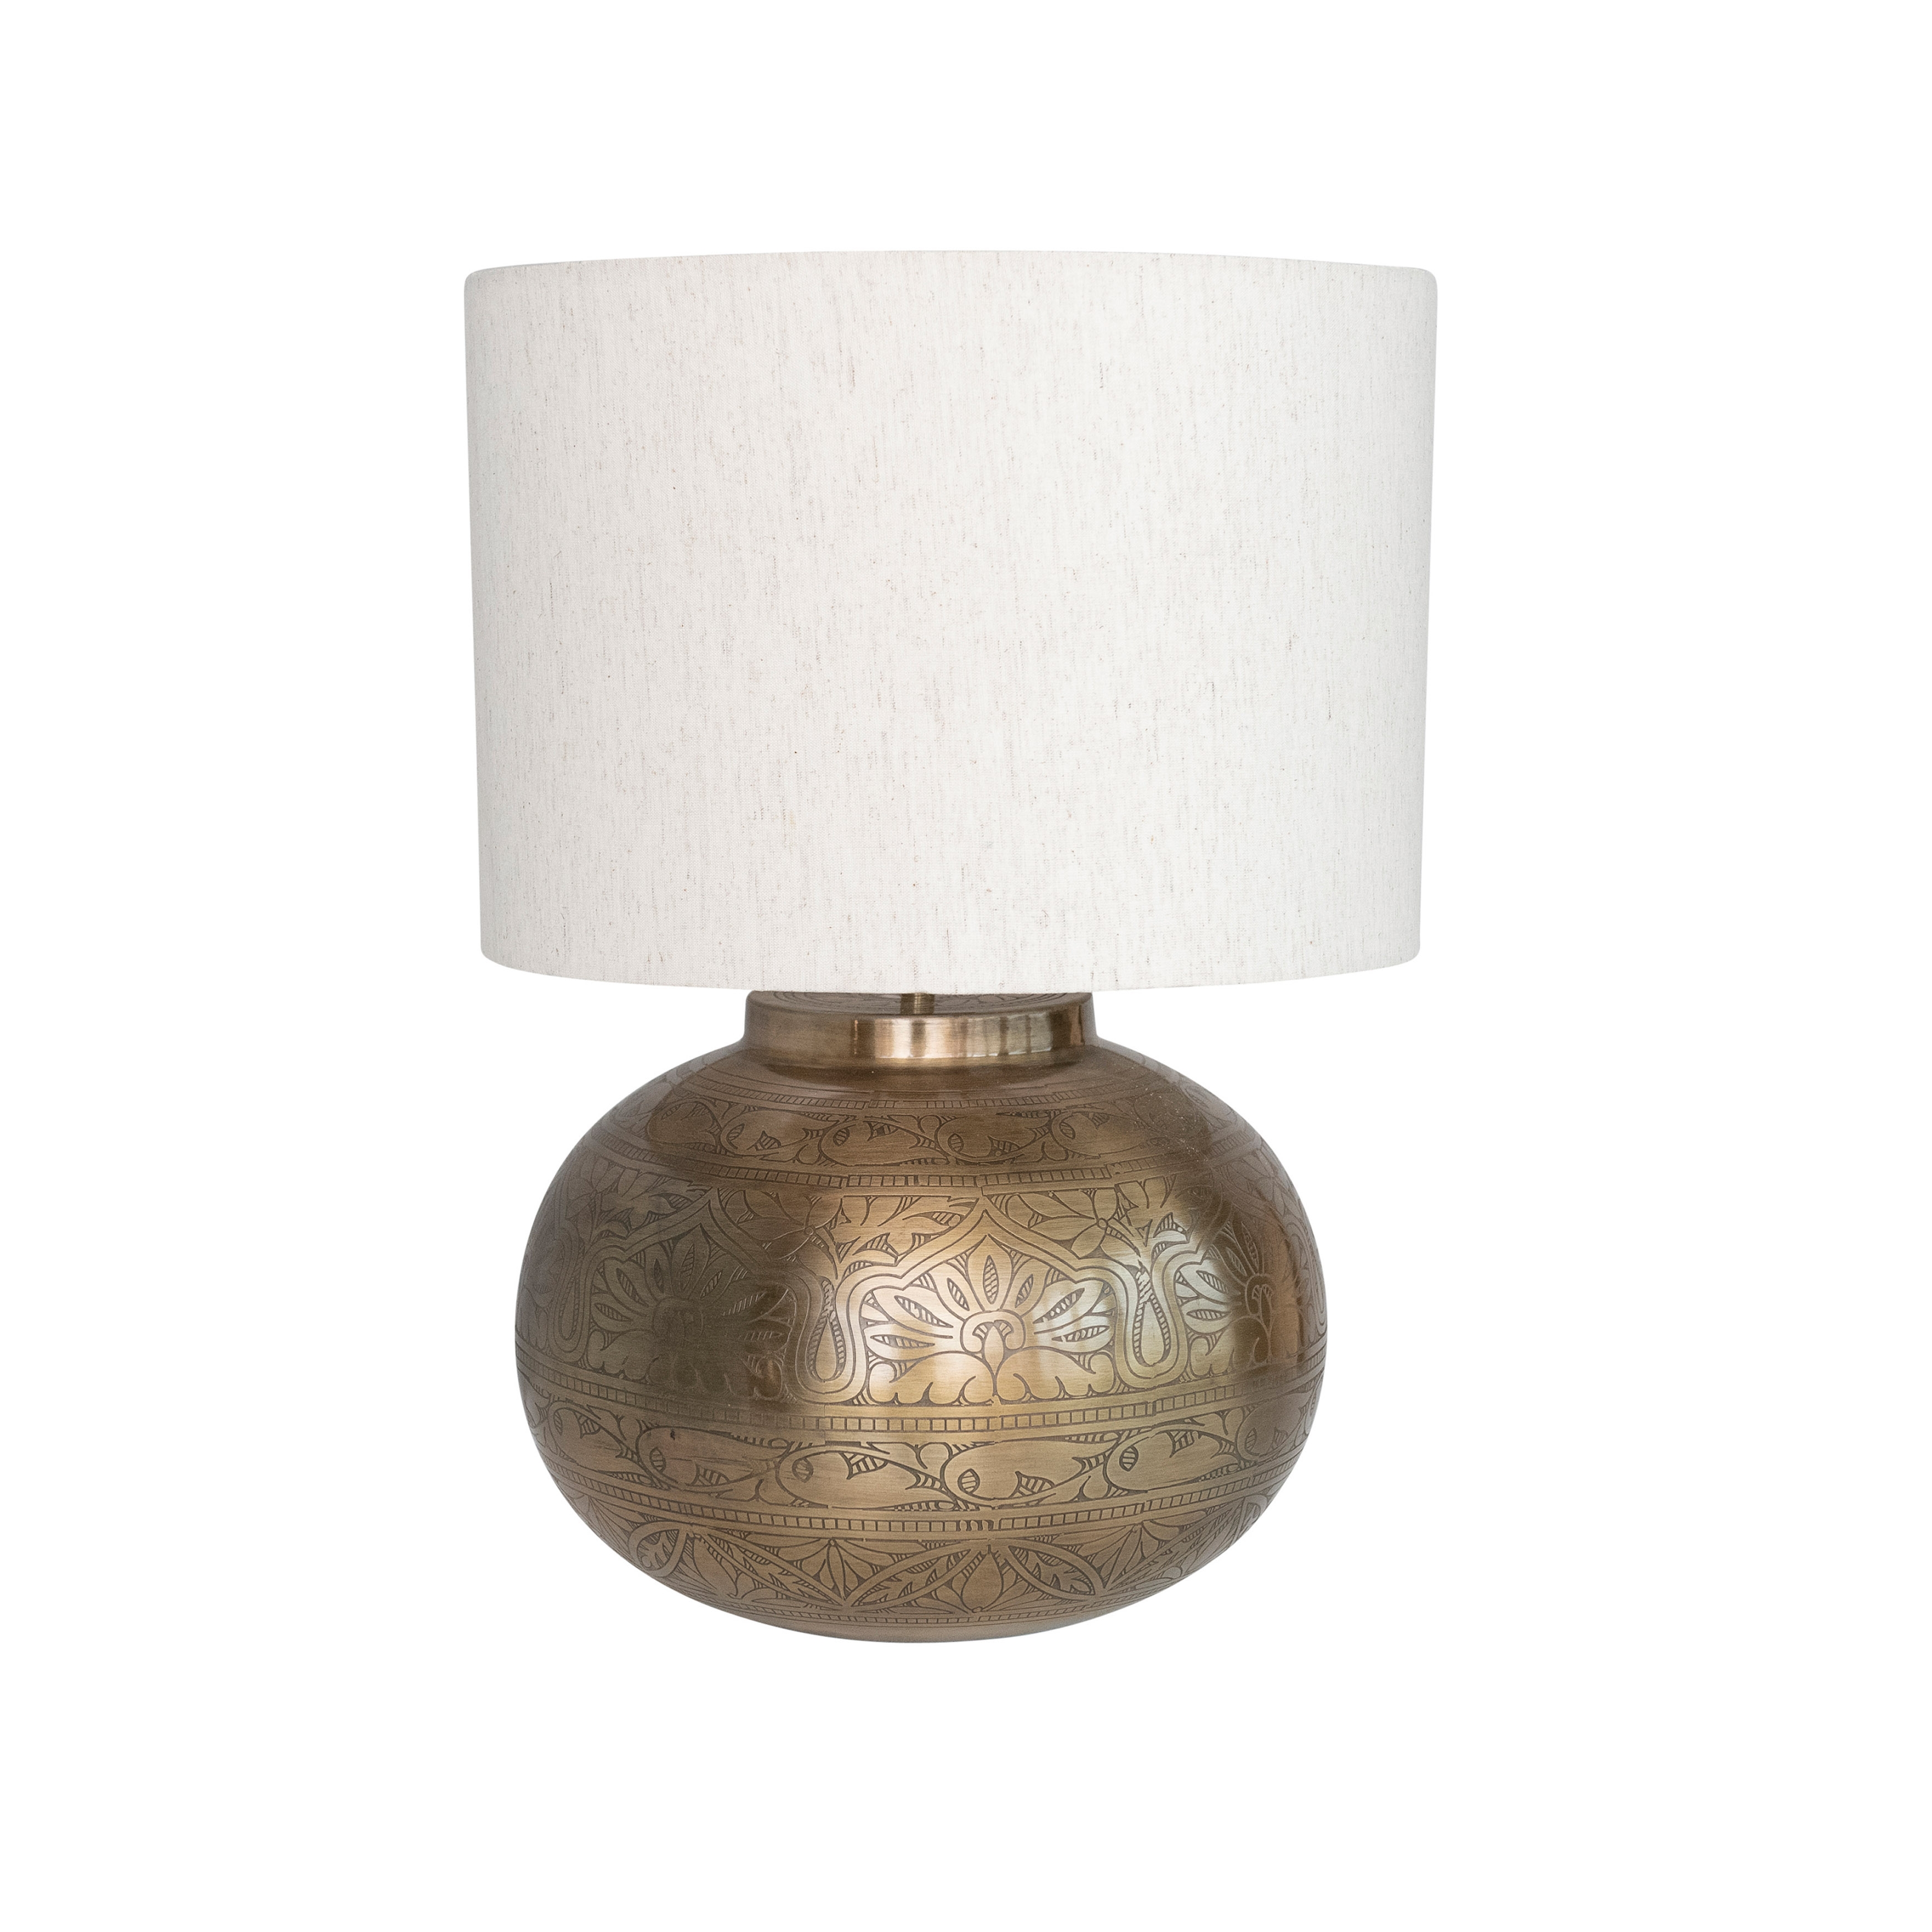 14 Inches Round Etched Metal Table Lamp with Cotton Shade and Inline Switch for 40 Watts Bulb Maximum, Antique Brass Finish - Image 0